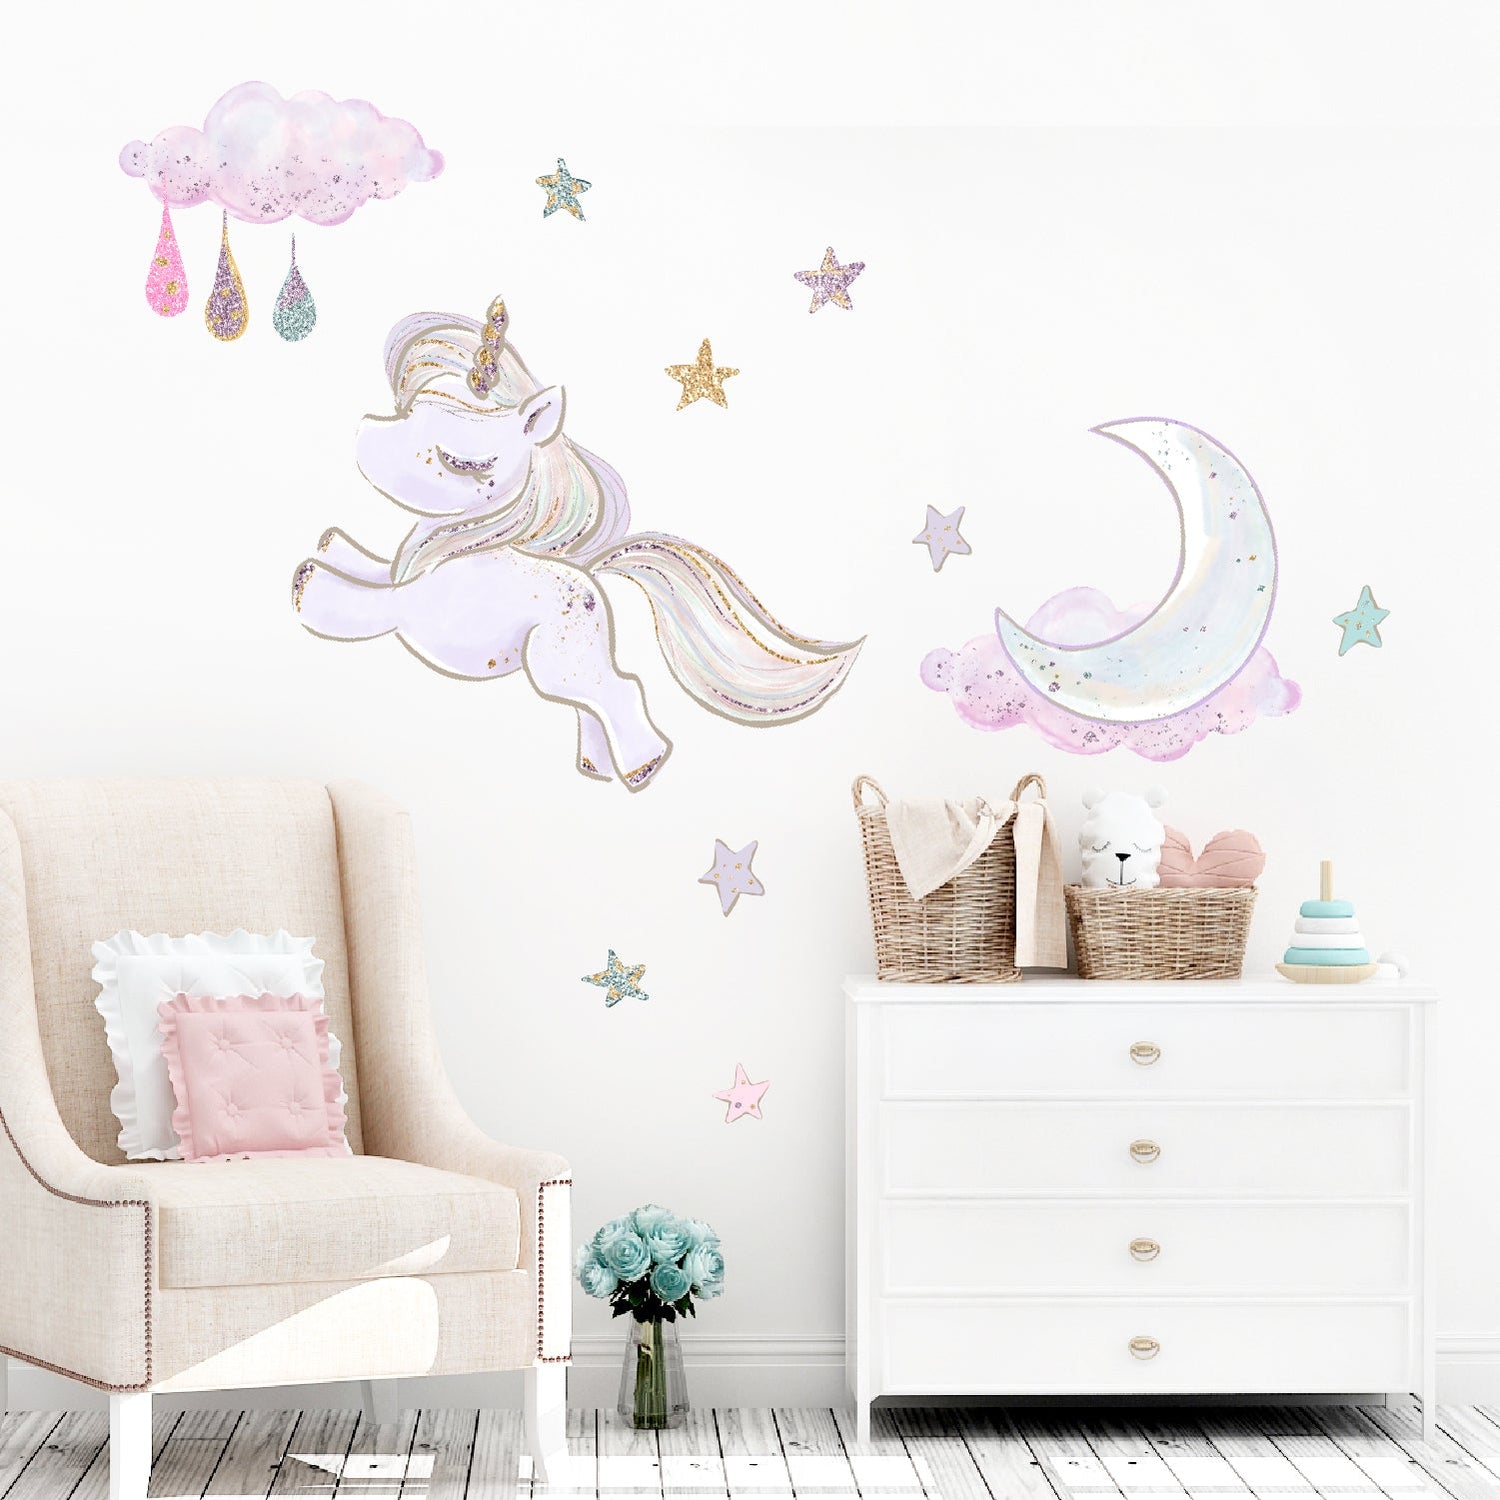 Nursery Wall Decals - Picture Perfect Decals